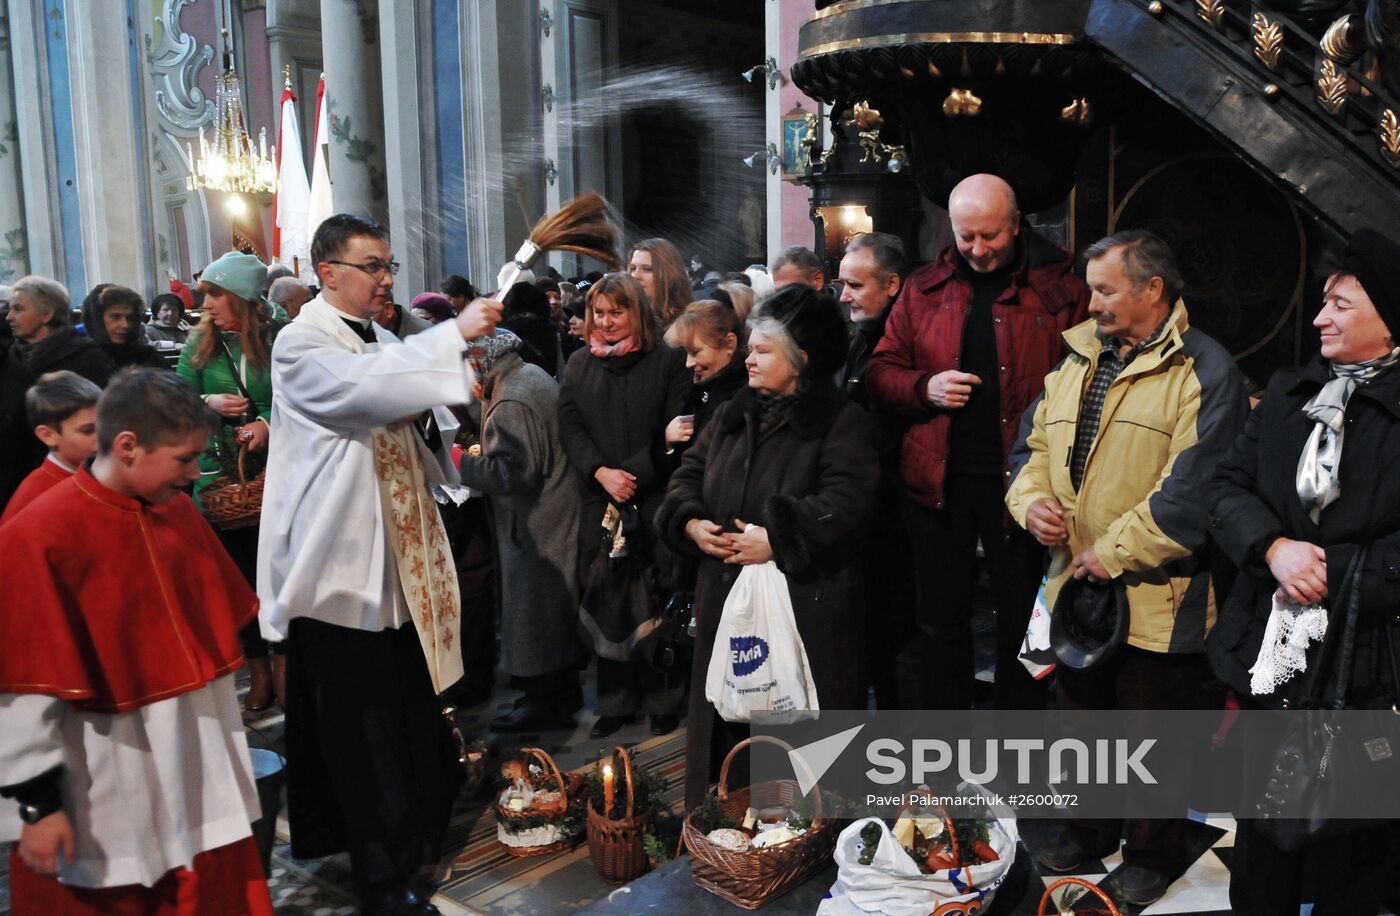 The blessing of Easter cakes in Lviv